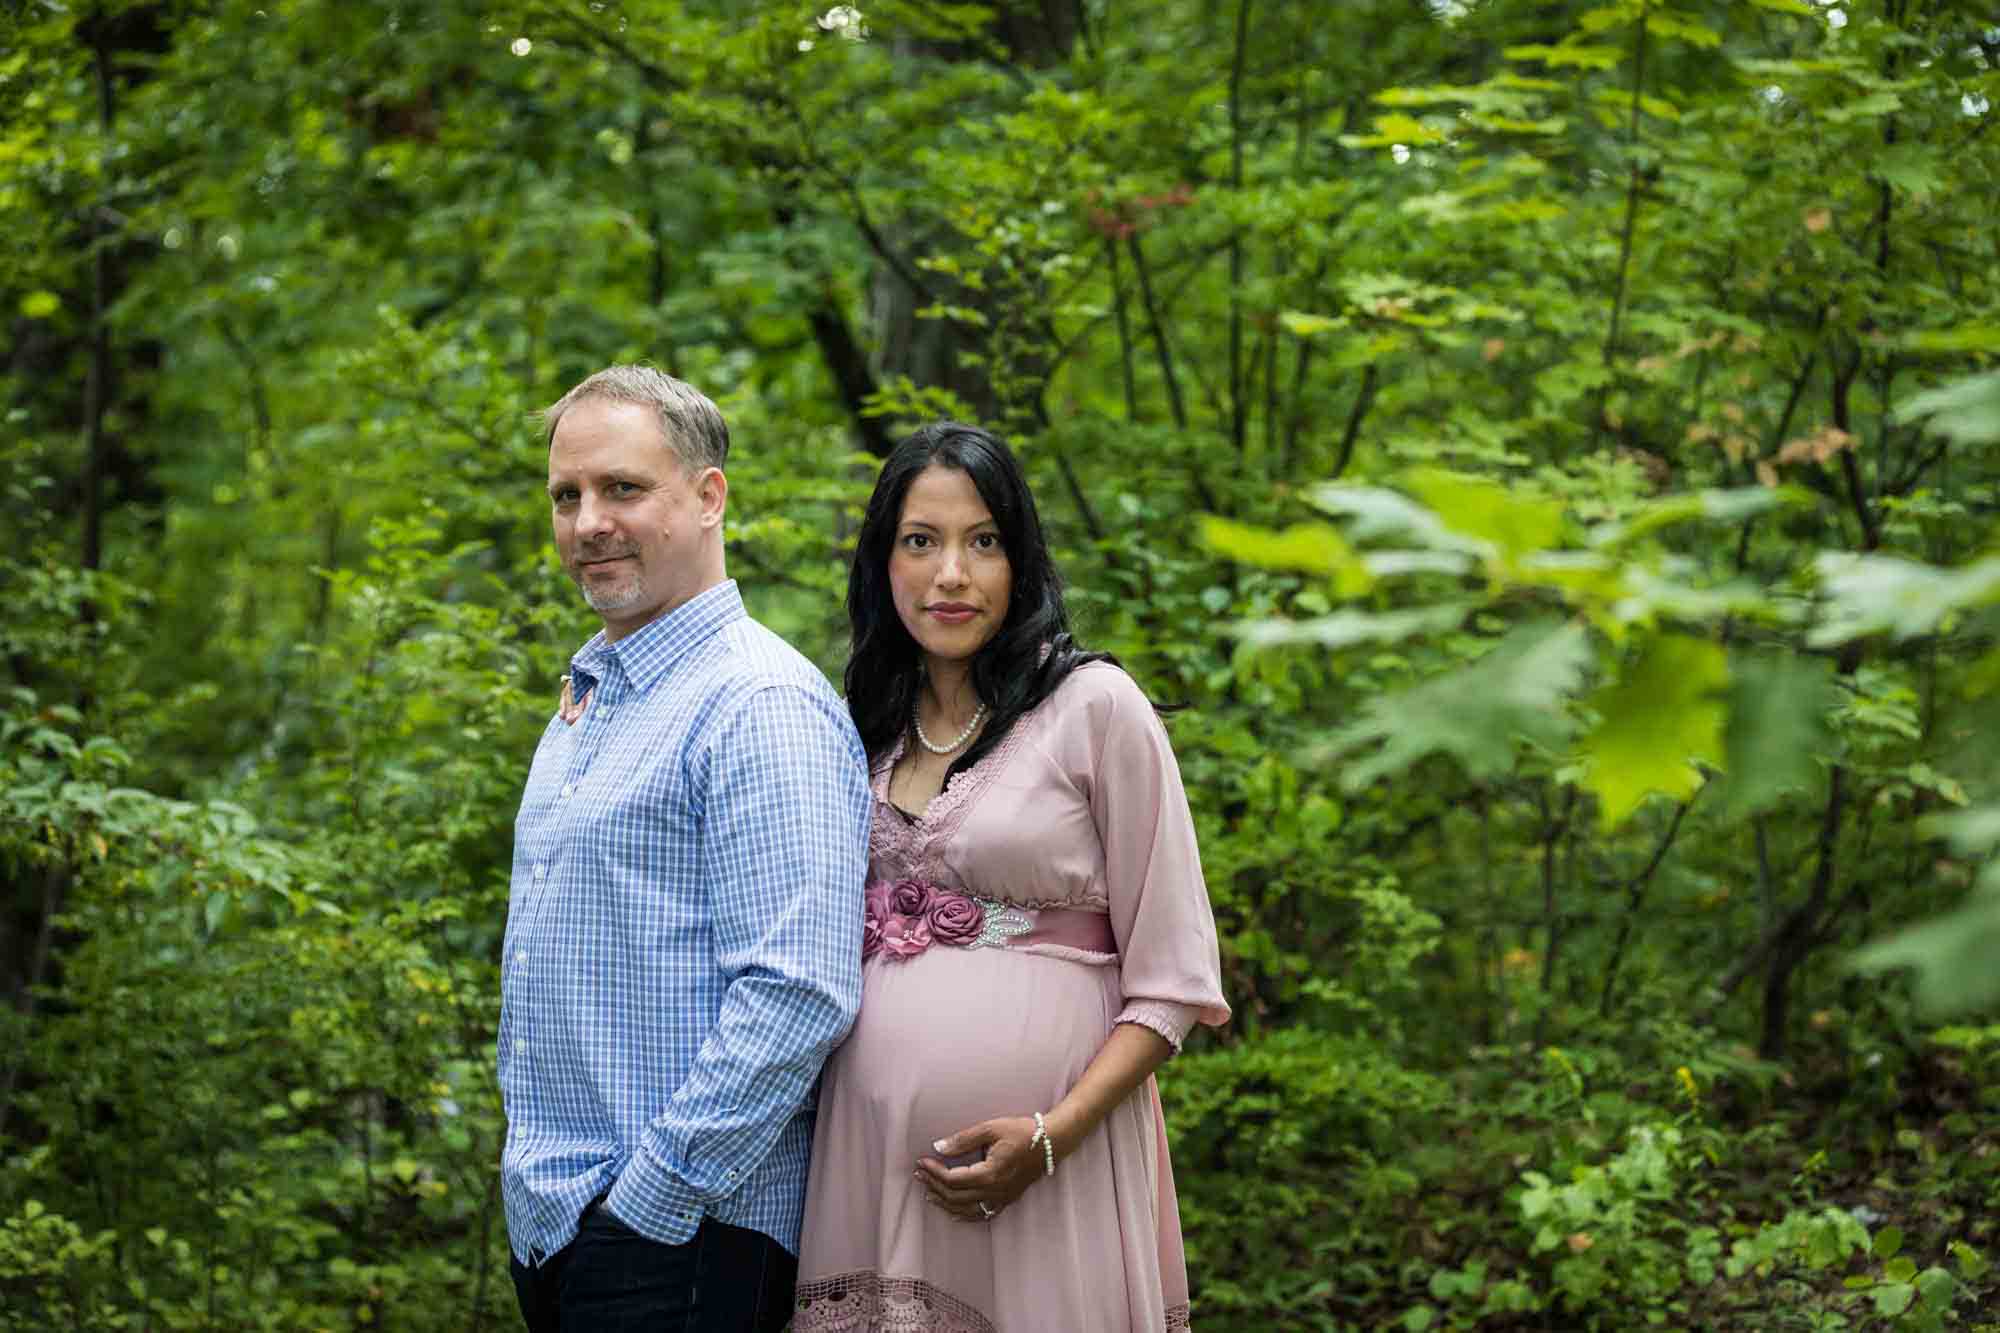 Forest Park maternity photos of a couple standing in a forest